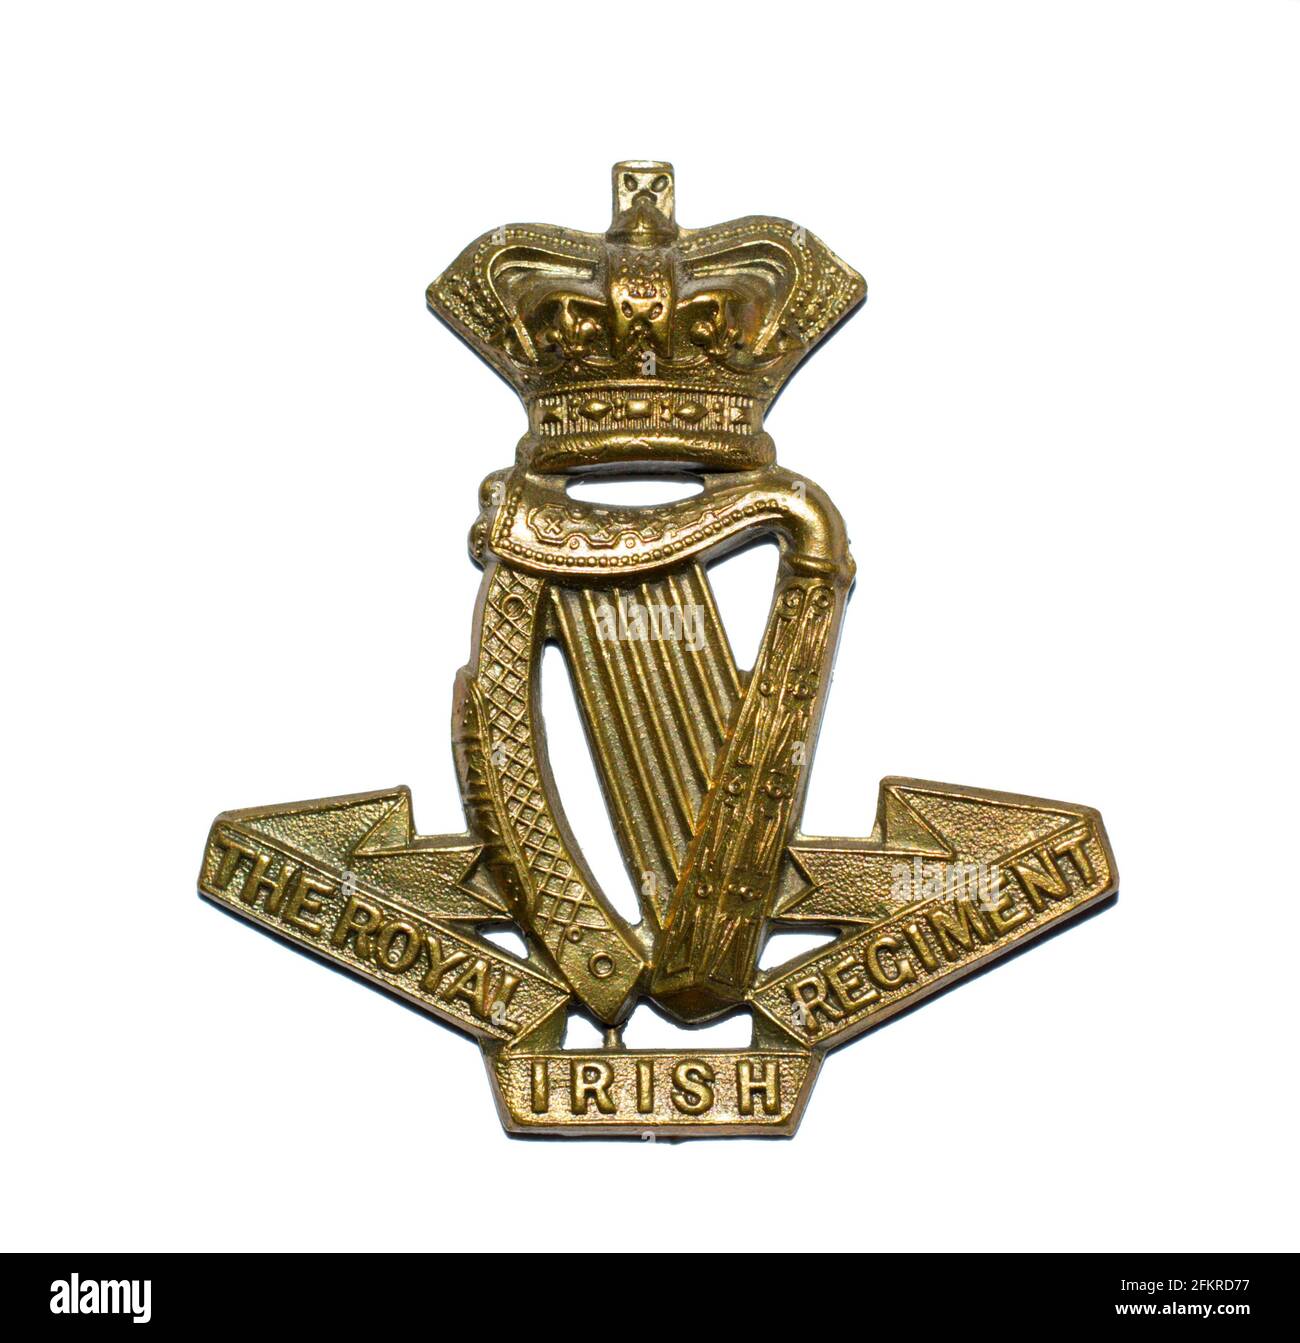 A cap badge of The Royal Irish Regiment , with Queen Victorias crown pre 1901. Stock Photo